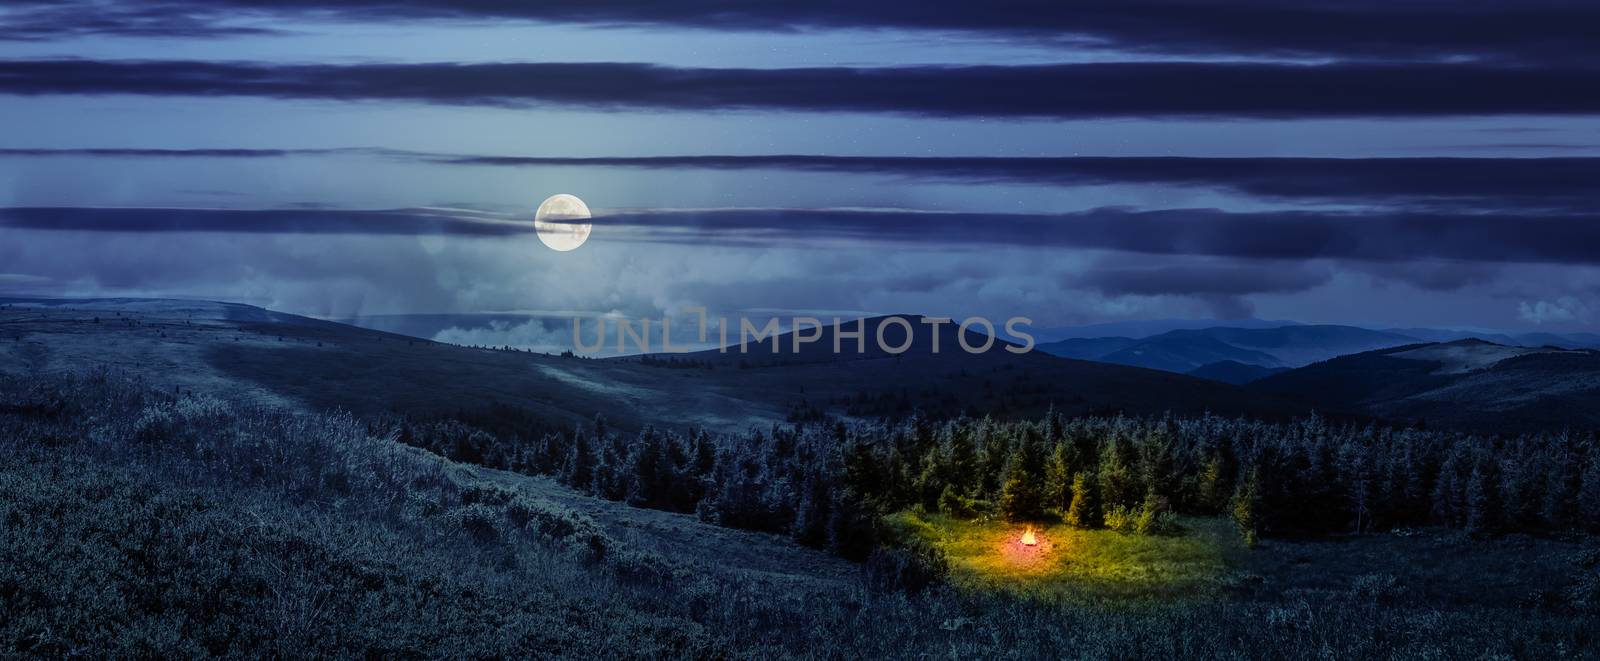 bonfire in coniferous forest on a  mountain hill at night by Pellinni